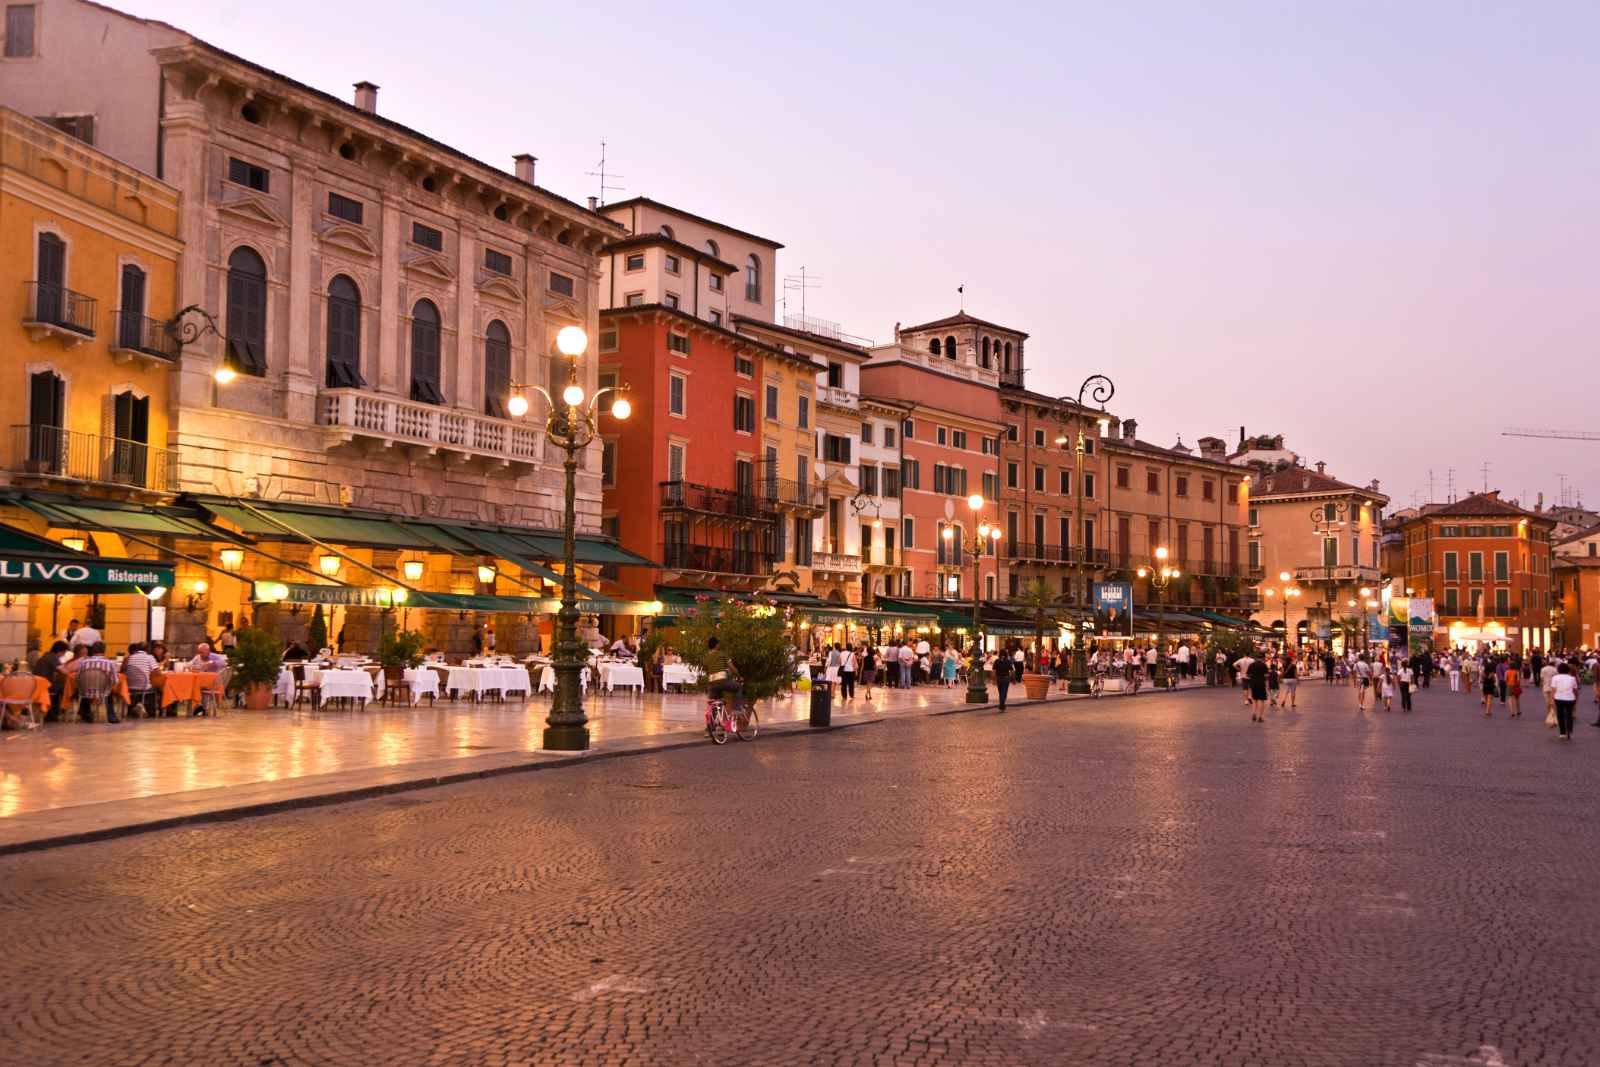 Things to Do in Verona Piazza Bra